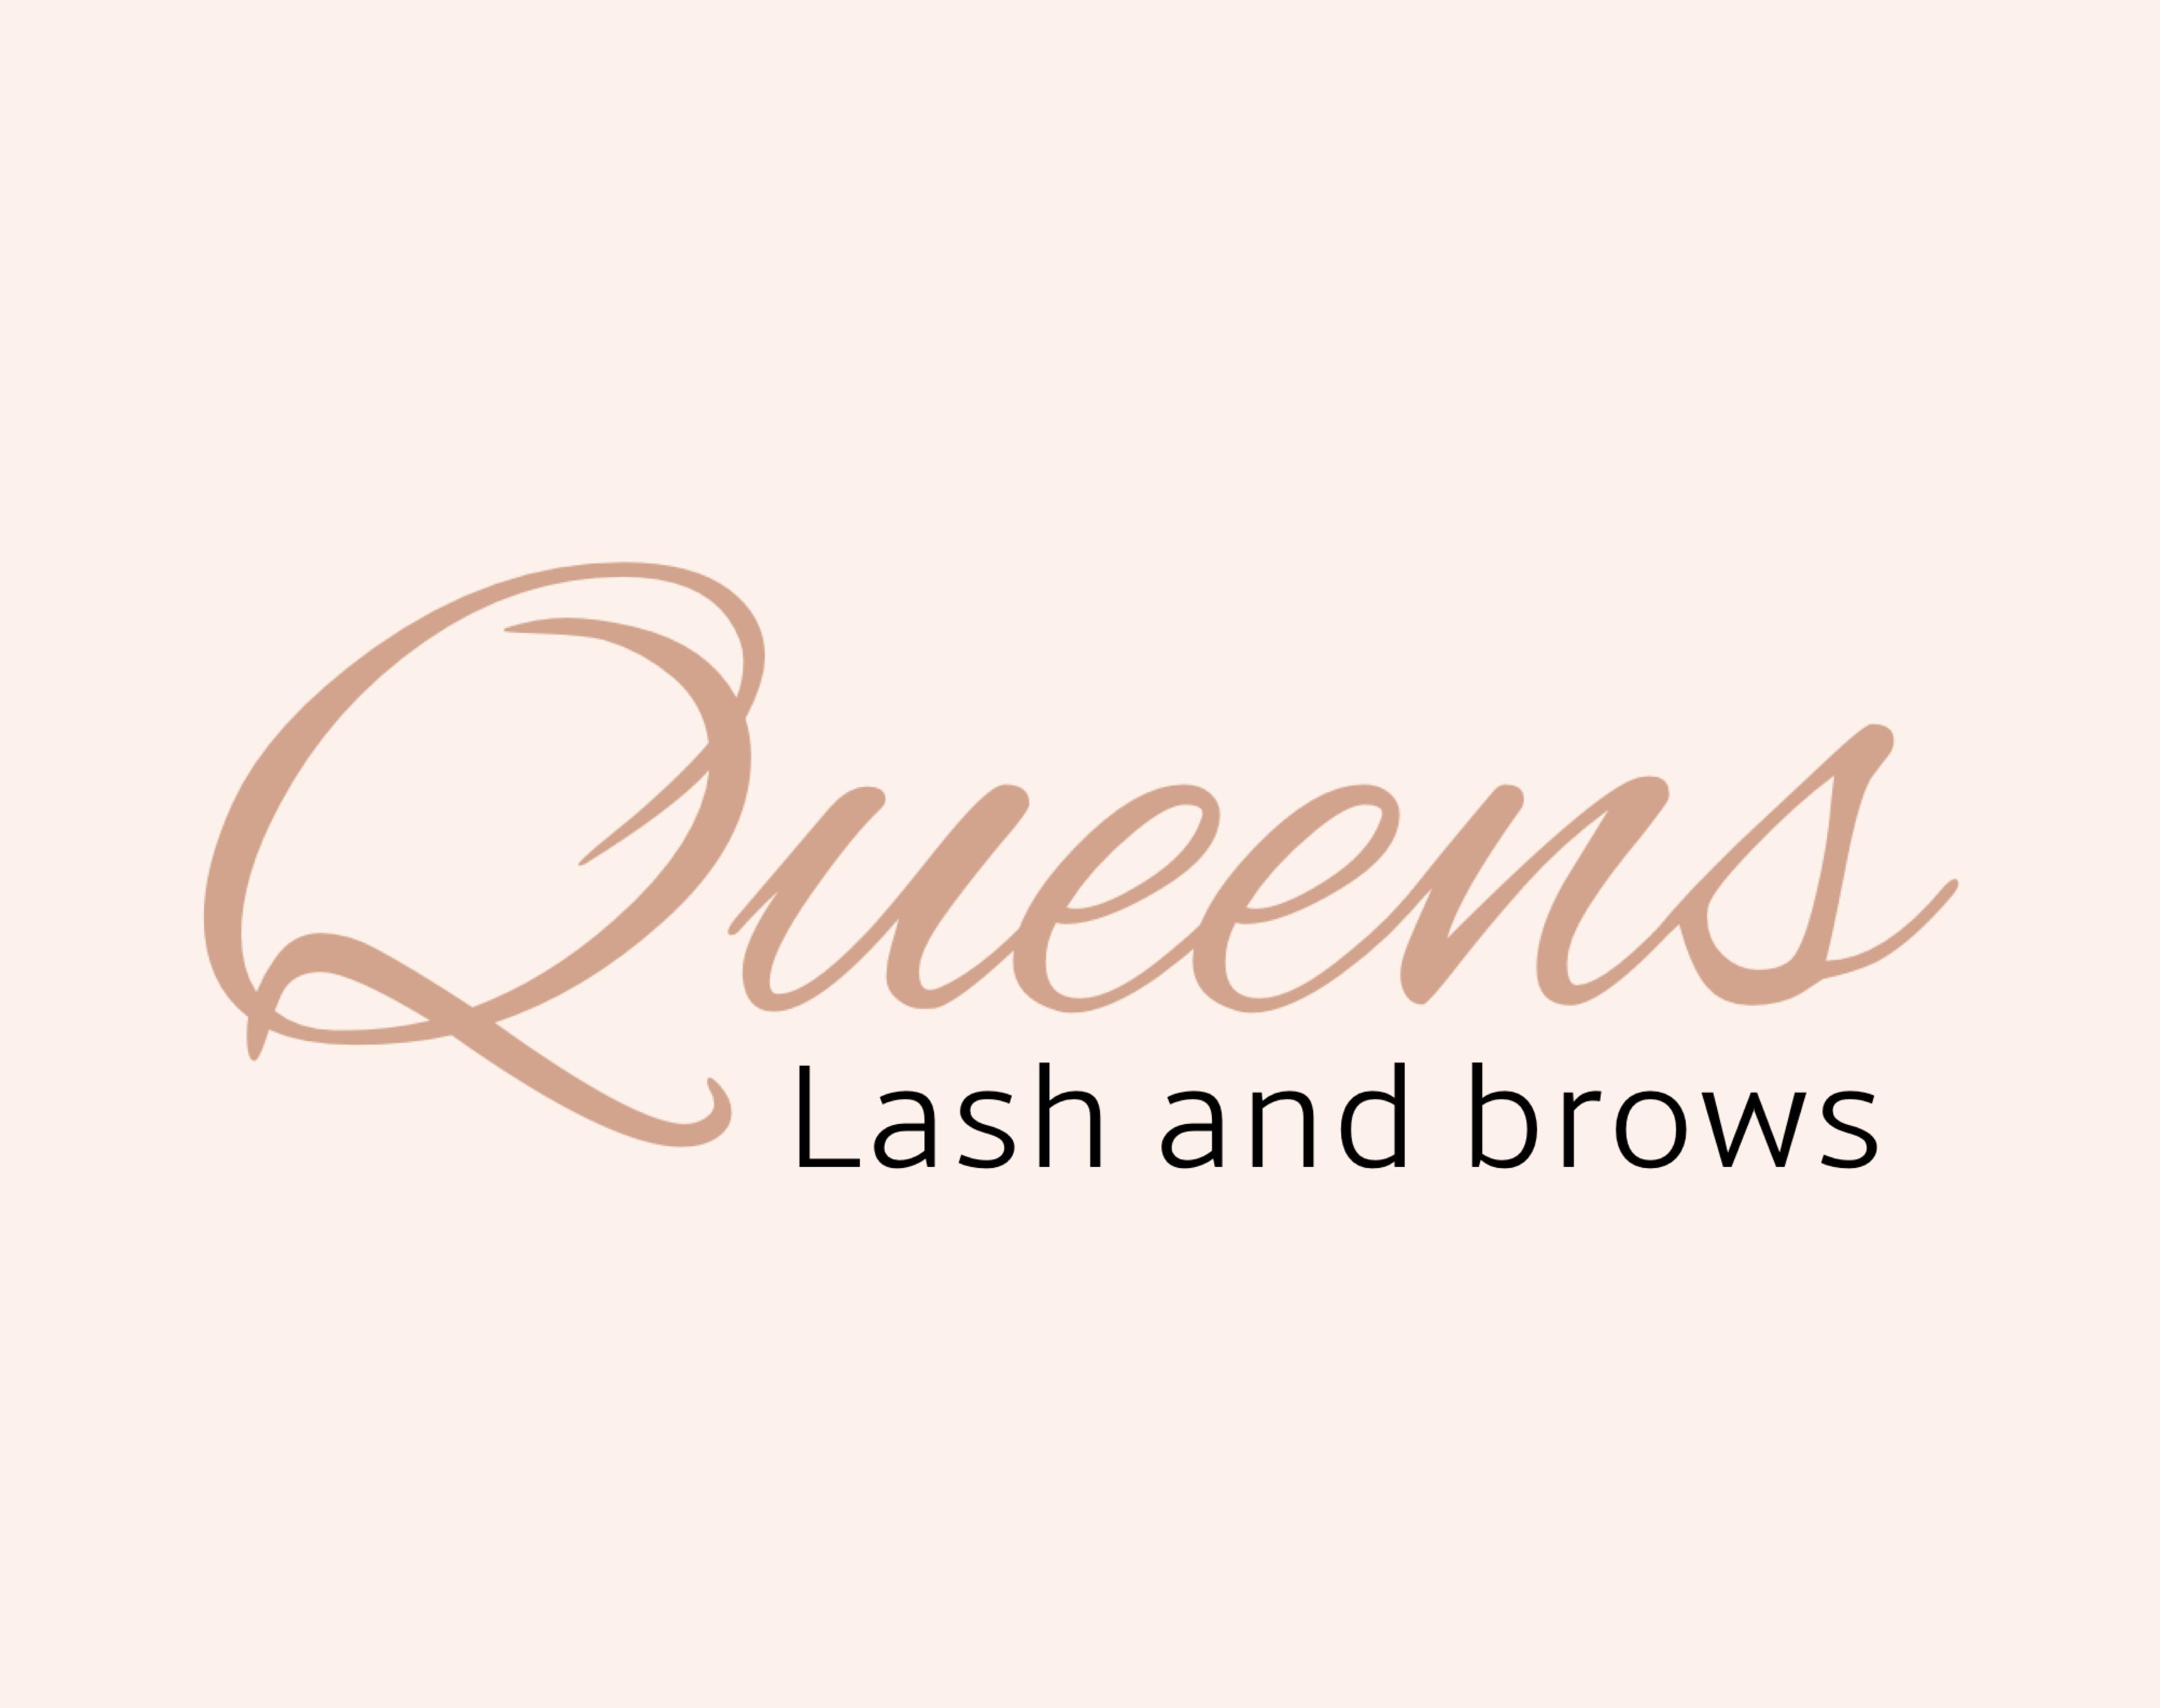 Queen’s lash and brows